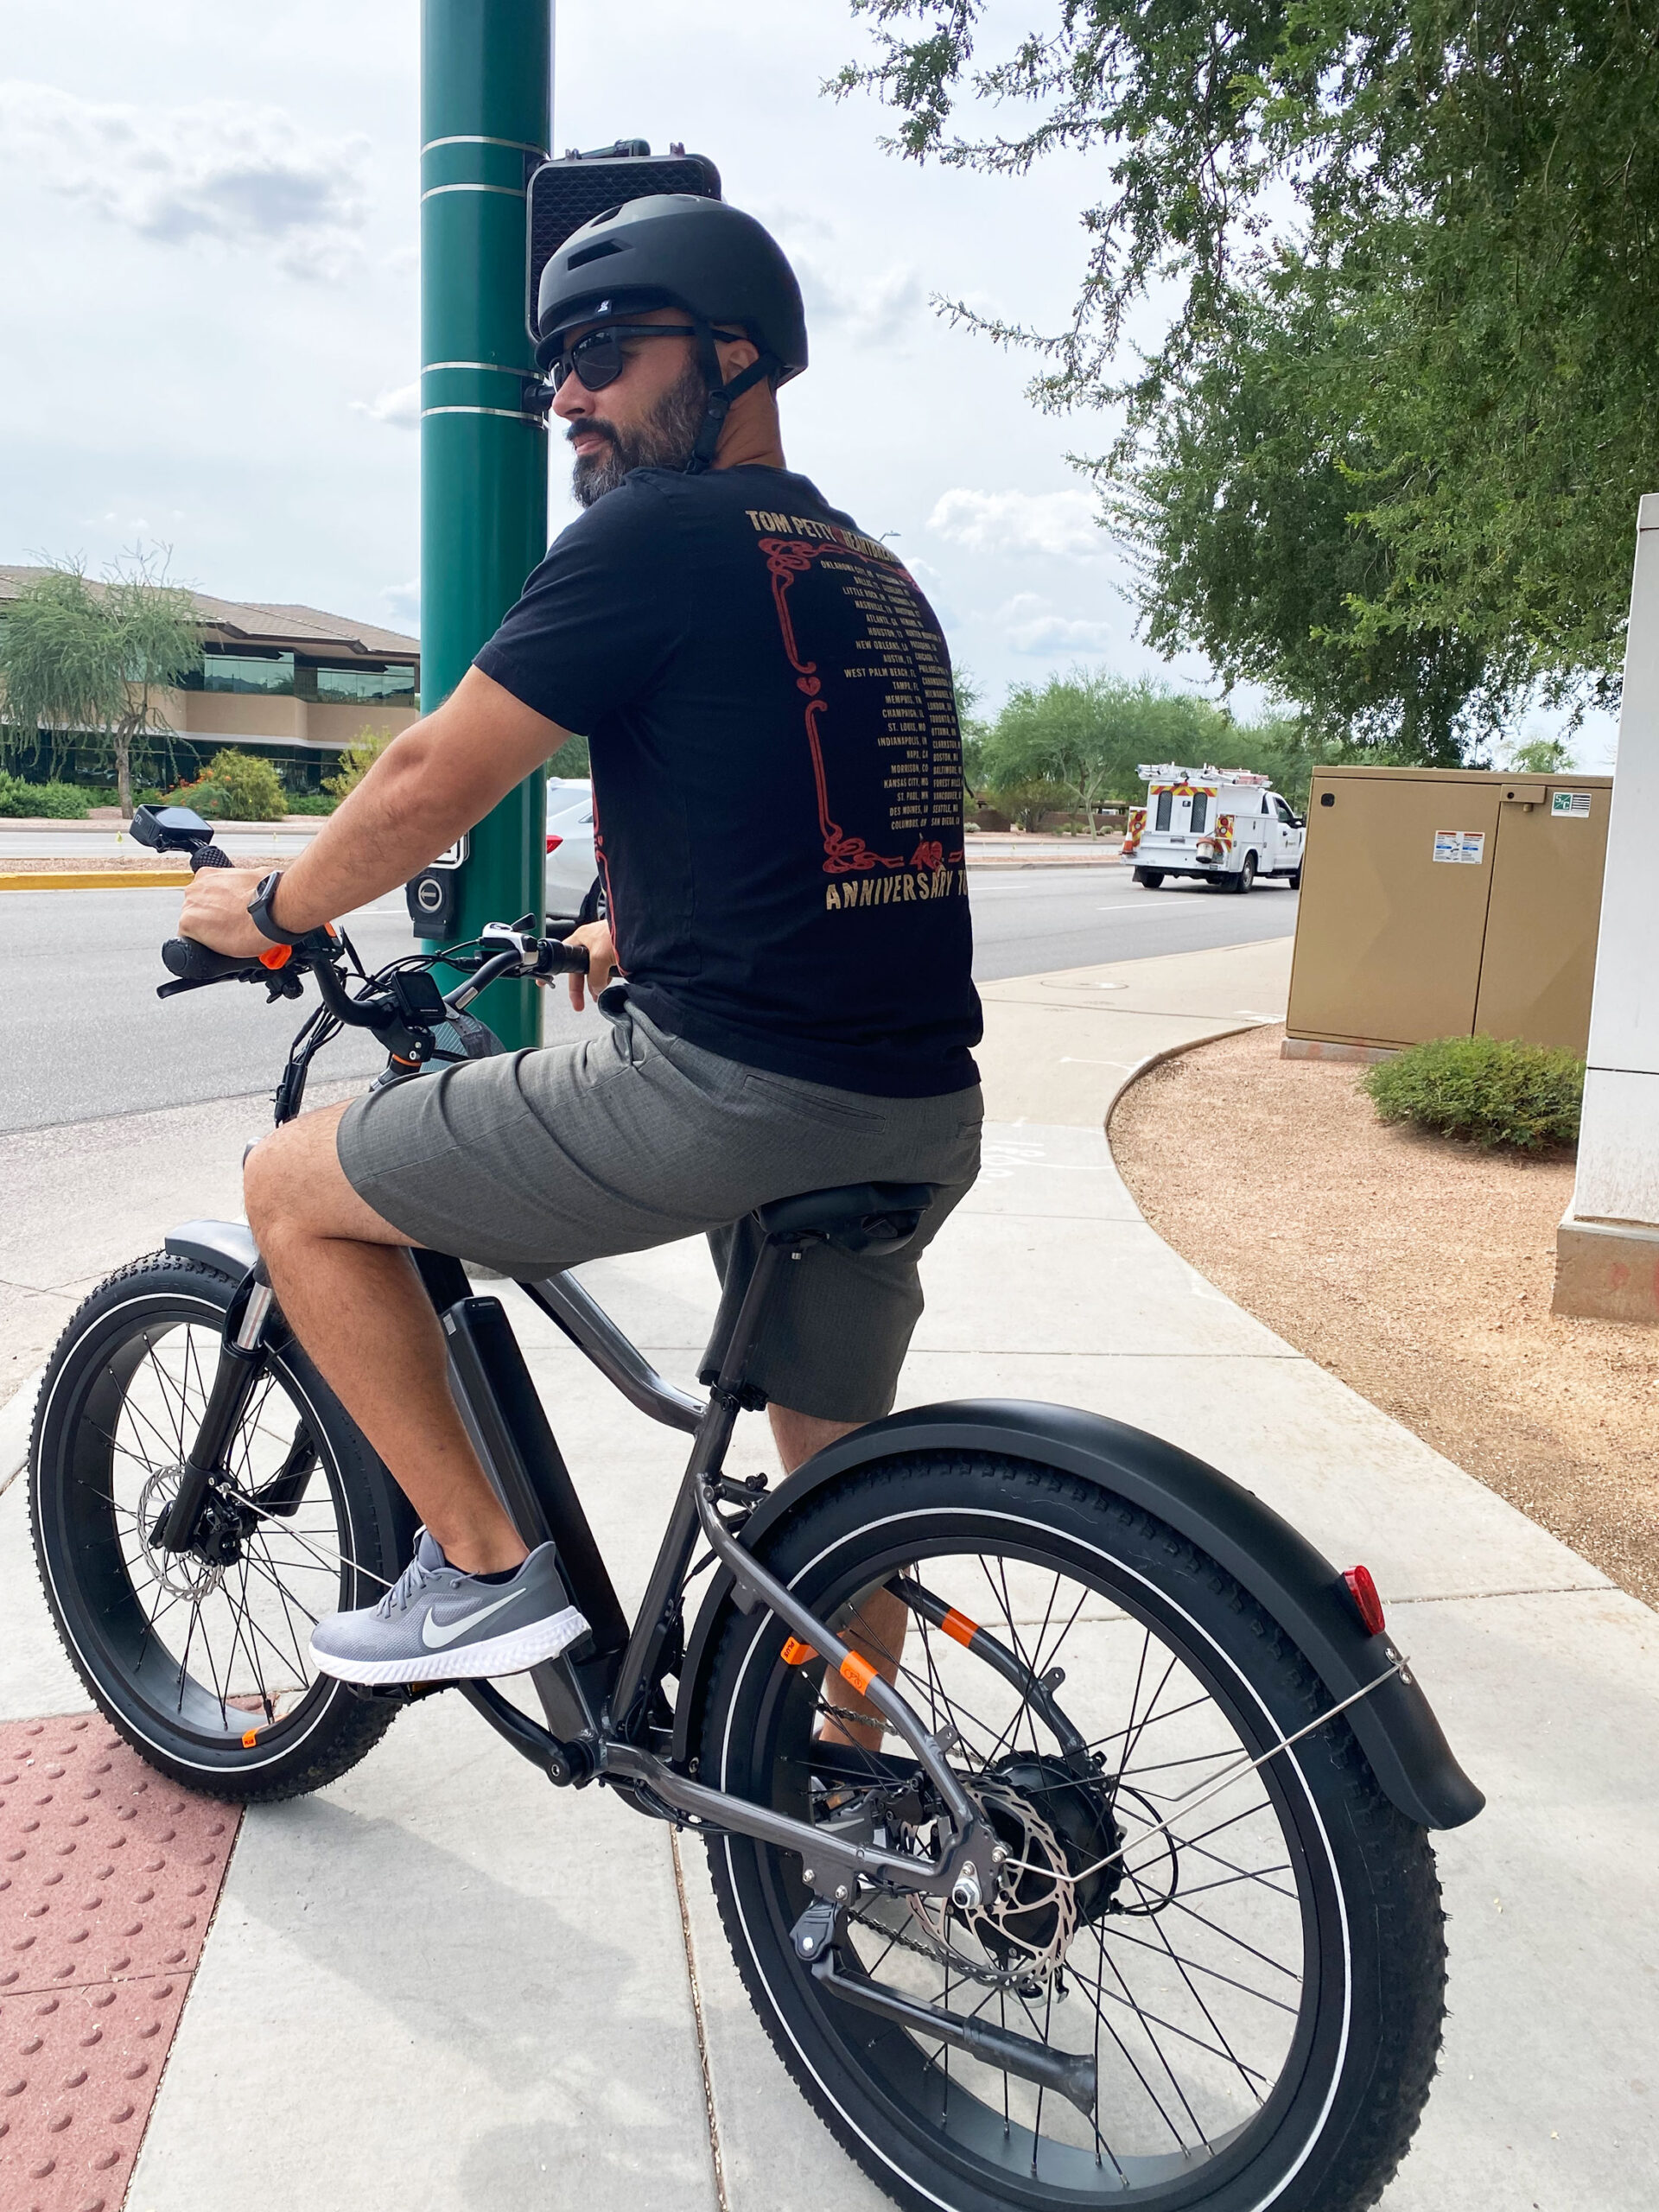 the RadRover 6 + has all the latest e-bike technology. #thelovedesignedlife #ebikereview